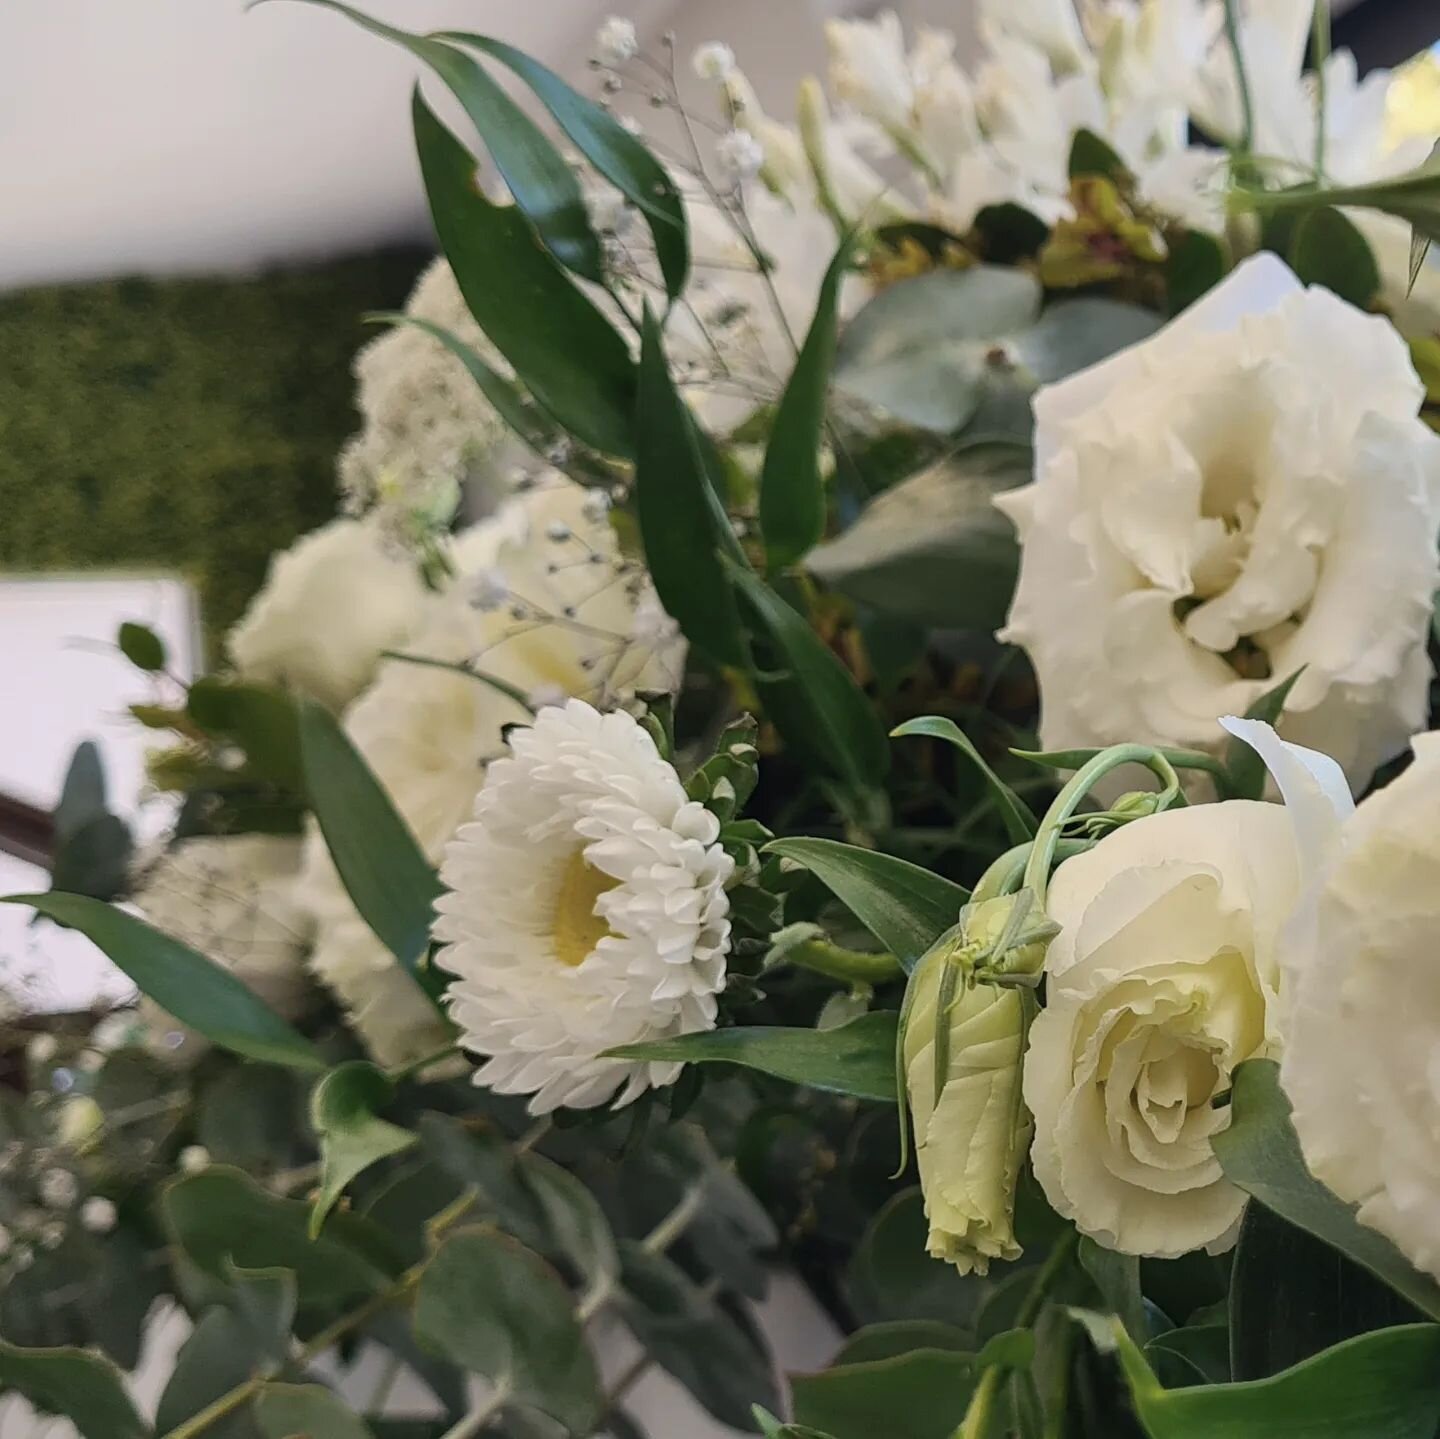 Started the wedding season off with a beauty 🤍
Talayna &amp; Ben are so lovely and it was a pleasure to add my flowers to their very intimate and personal day. More to come in the future!
#teamb #weddingflowers #allwhiteeverything #manawatuflorist #